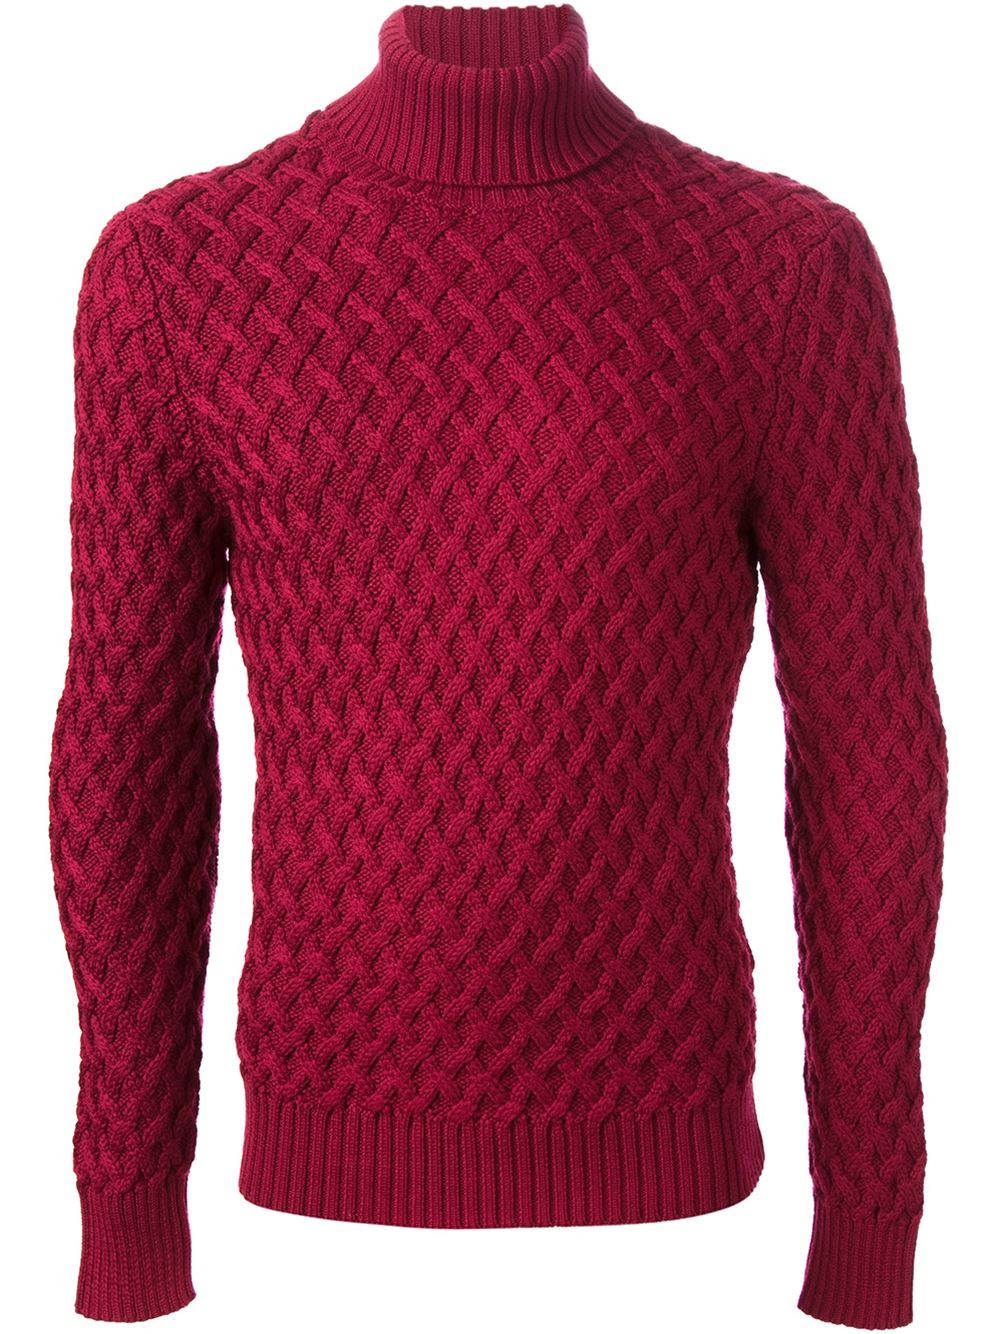 Lyst - Etro Cable Knit Sweater in Red for Men